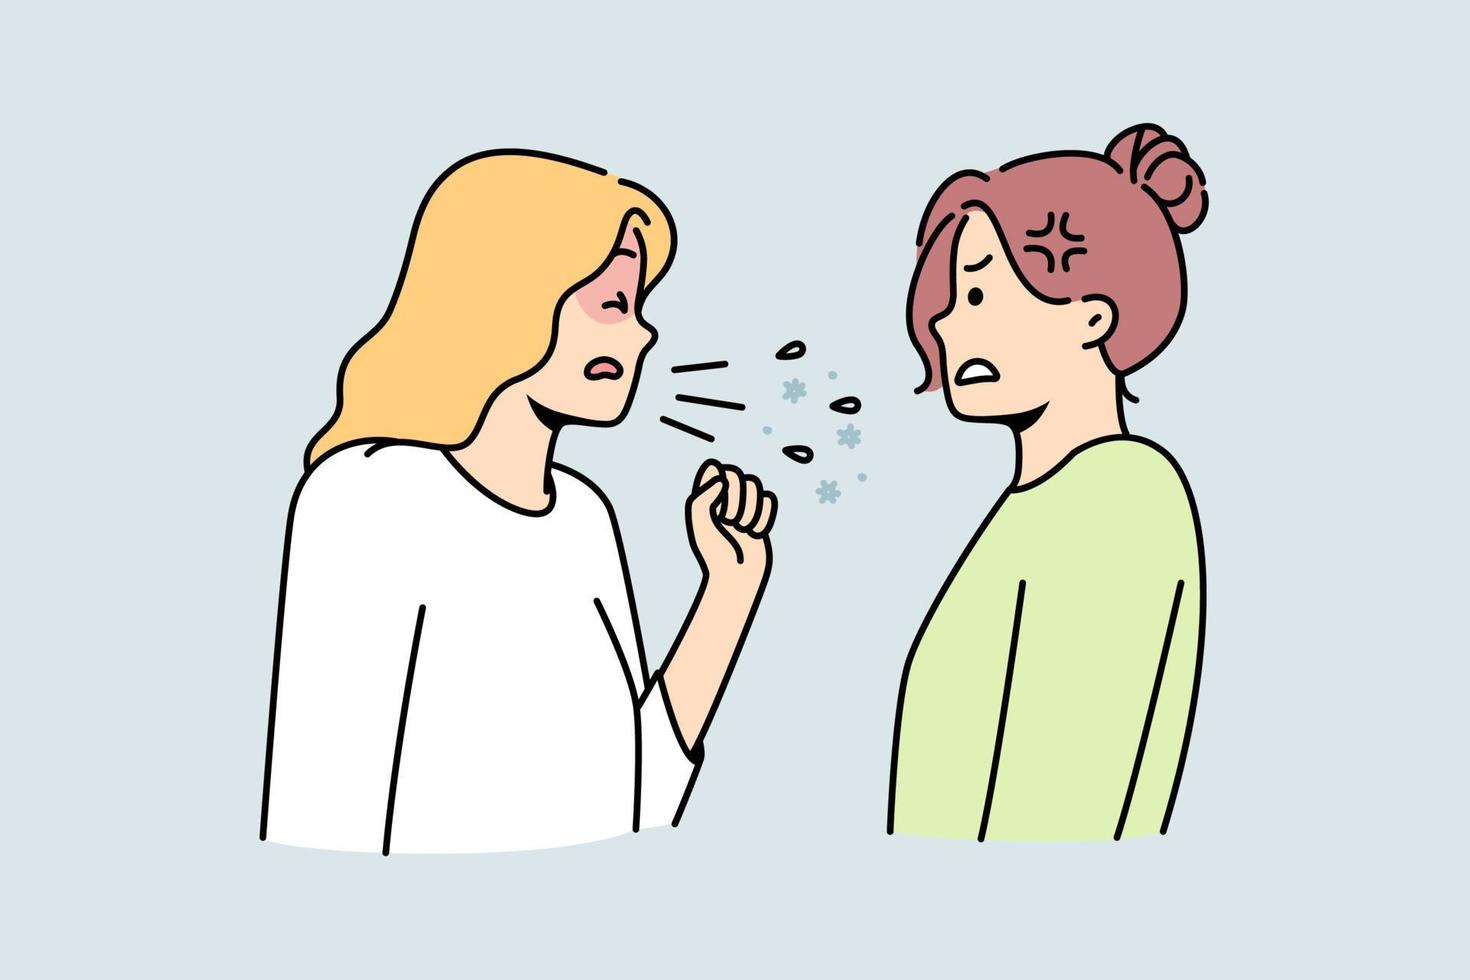 Unhealthy woman cough share disease to friend or colleague. Sick unwell female suffer from covid or cold infect girl standing near. Contagious sickness. Vector illustration.